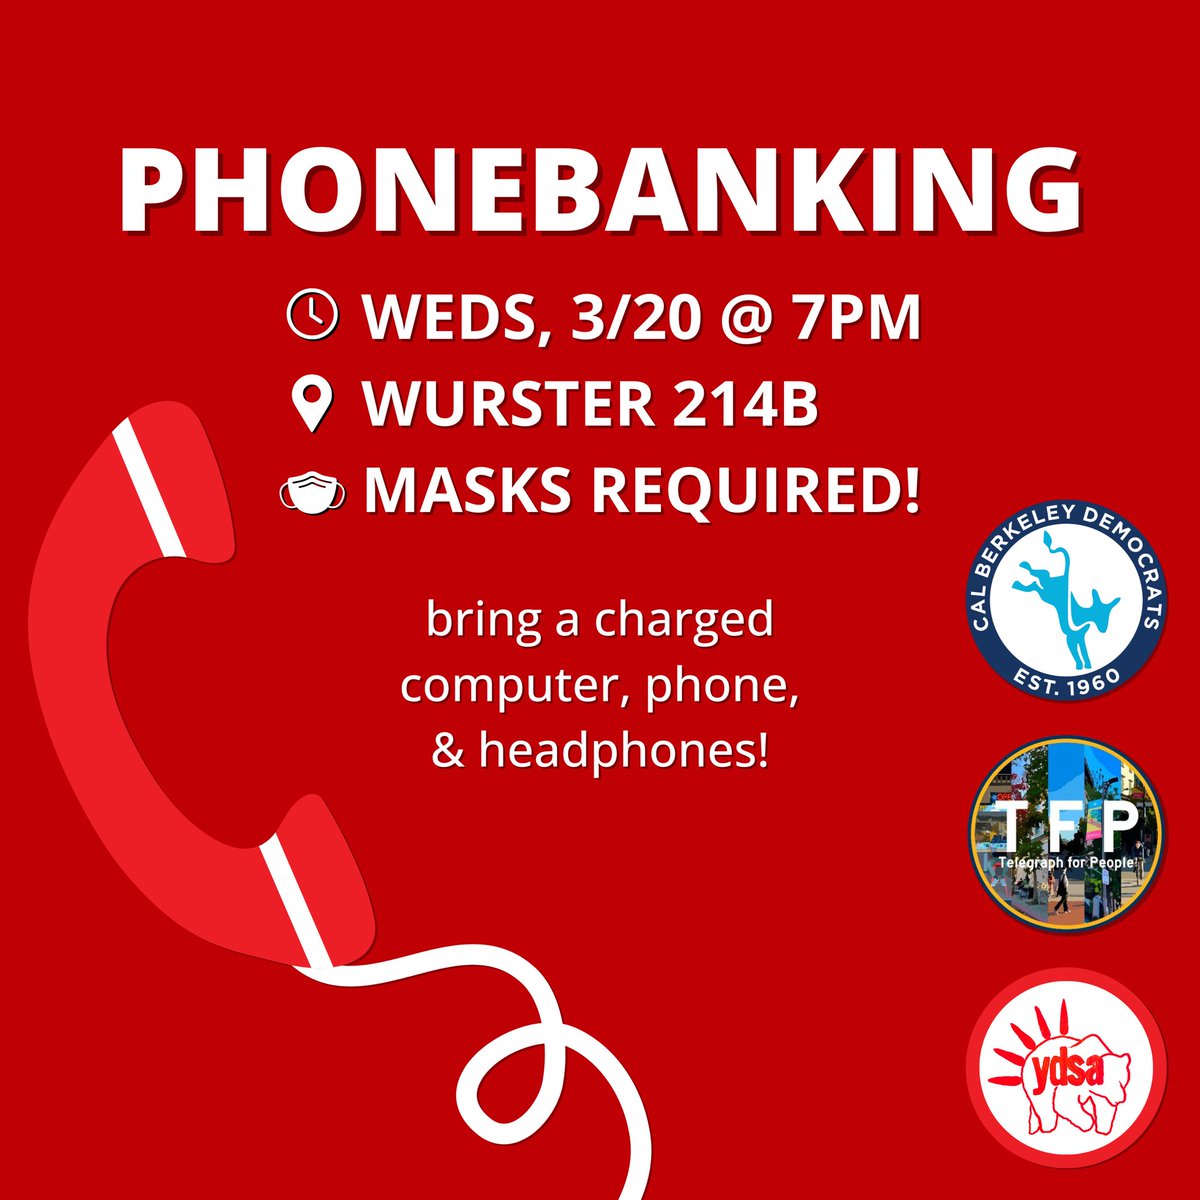 Join us and @telegraphforpeople, @calydsa, and @caldems this Wednesday at 7pm in Wurster 214B! We'll be phonebanking to fundraise for our grassroots, student-led campaign. Please bring a charged computer, phone, headphones, and mask! Free pizza included 👀🍕